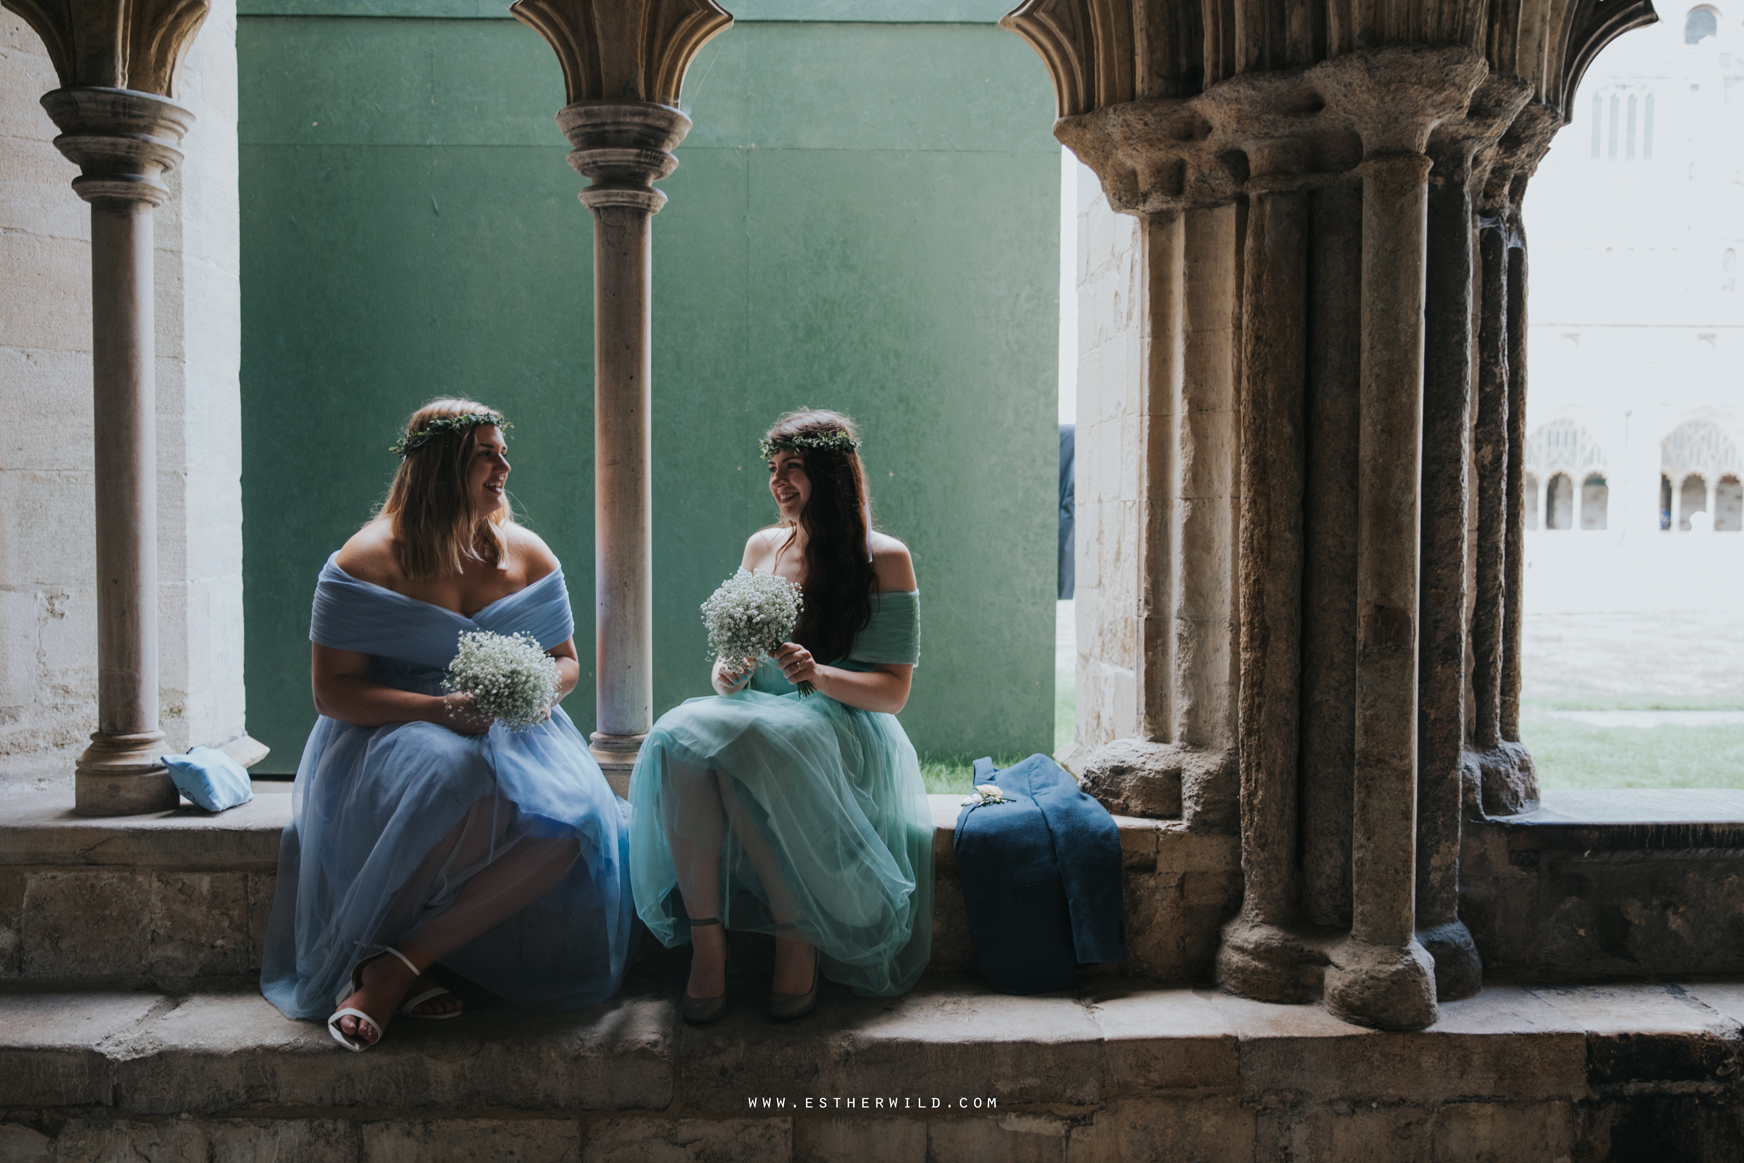 Norwich_Castle_Arcade_Grosvenor_Chip_Birdcage_Cathedral_Cloisters_Refectory_Wedding_Photography_Esther_Wild_Photographer_Norfolk_Kings_Lynn_3R8A1837.jpg